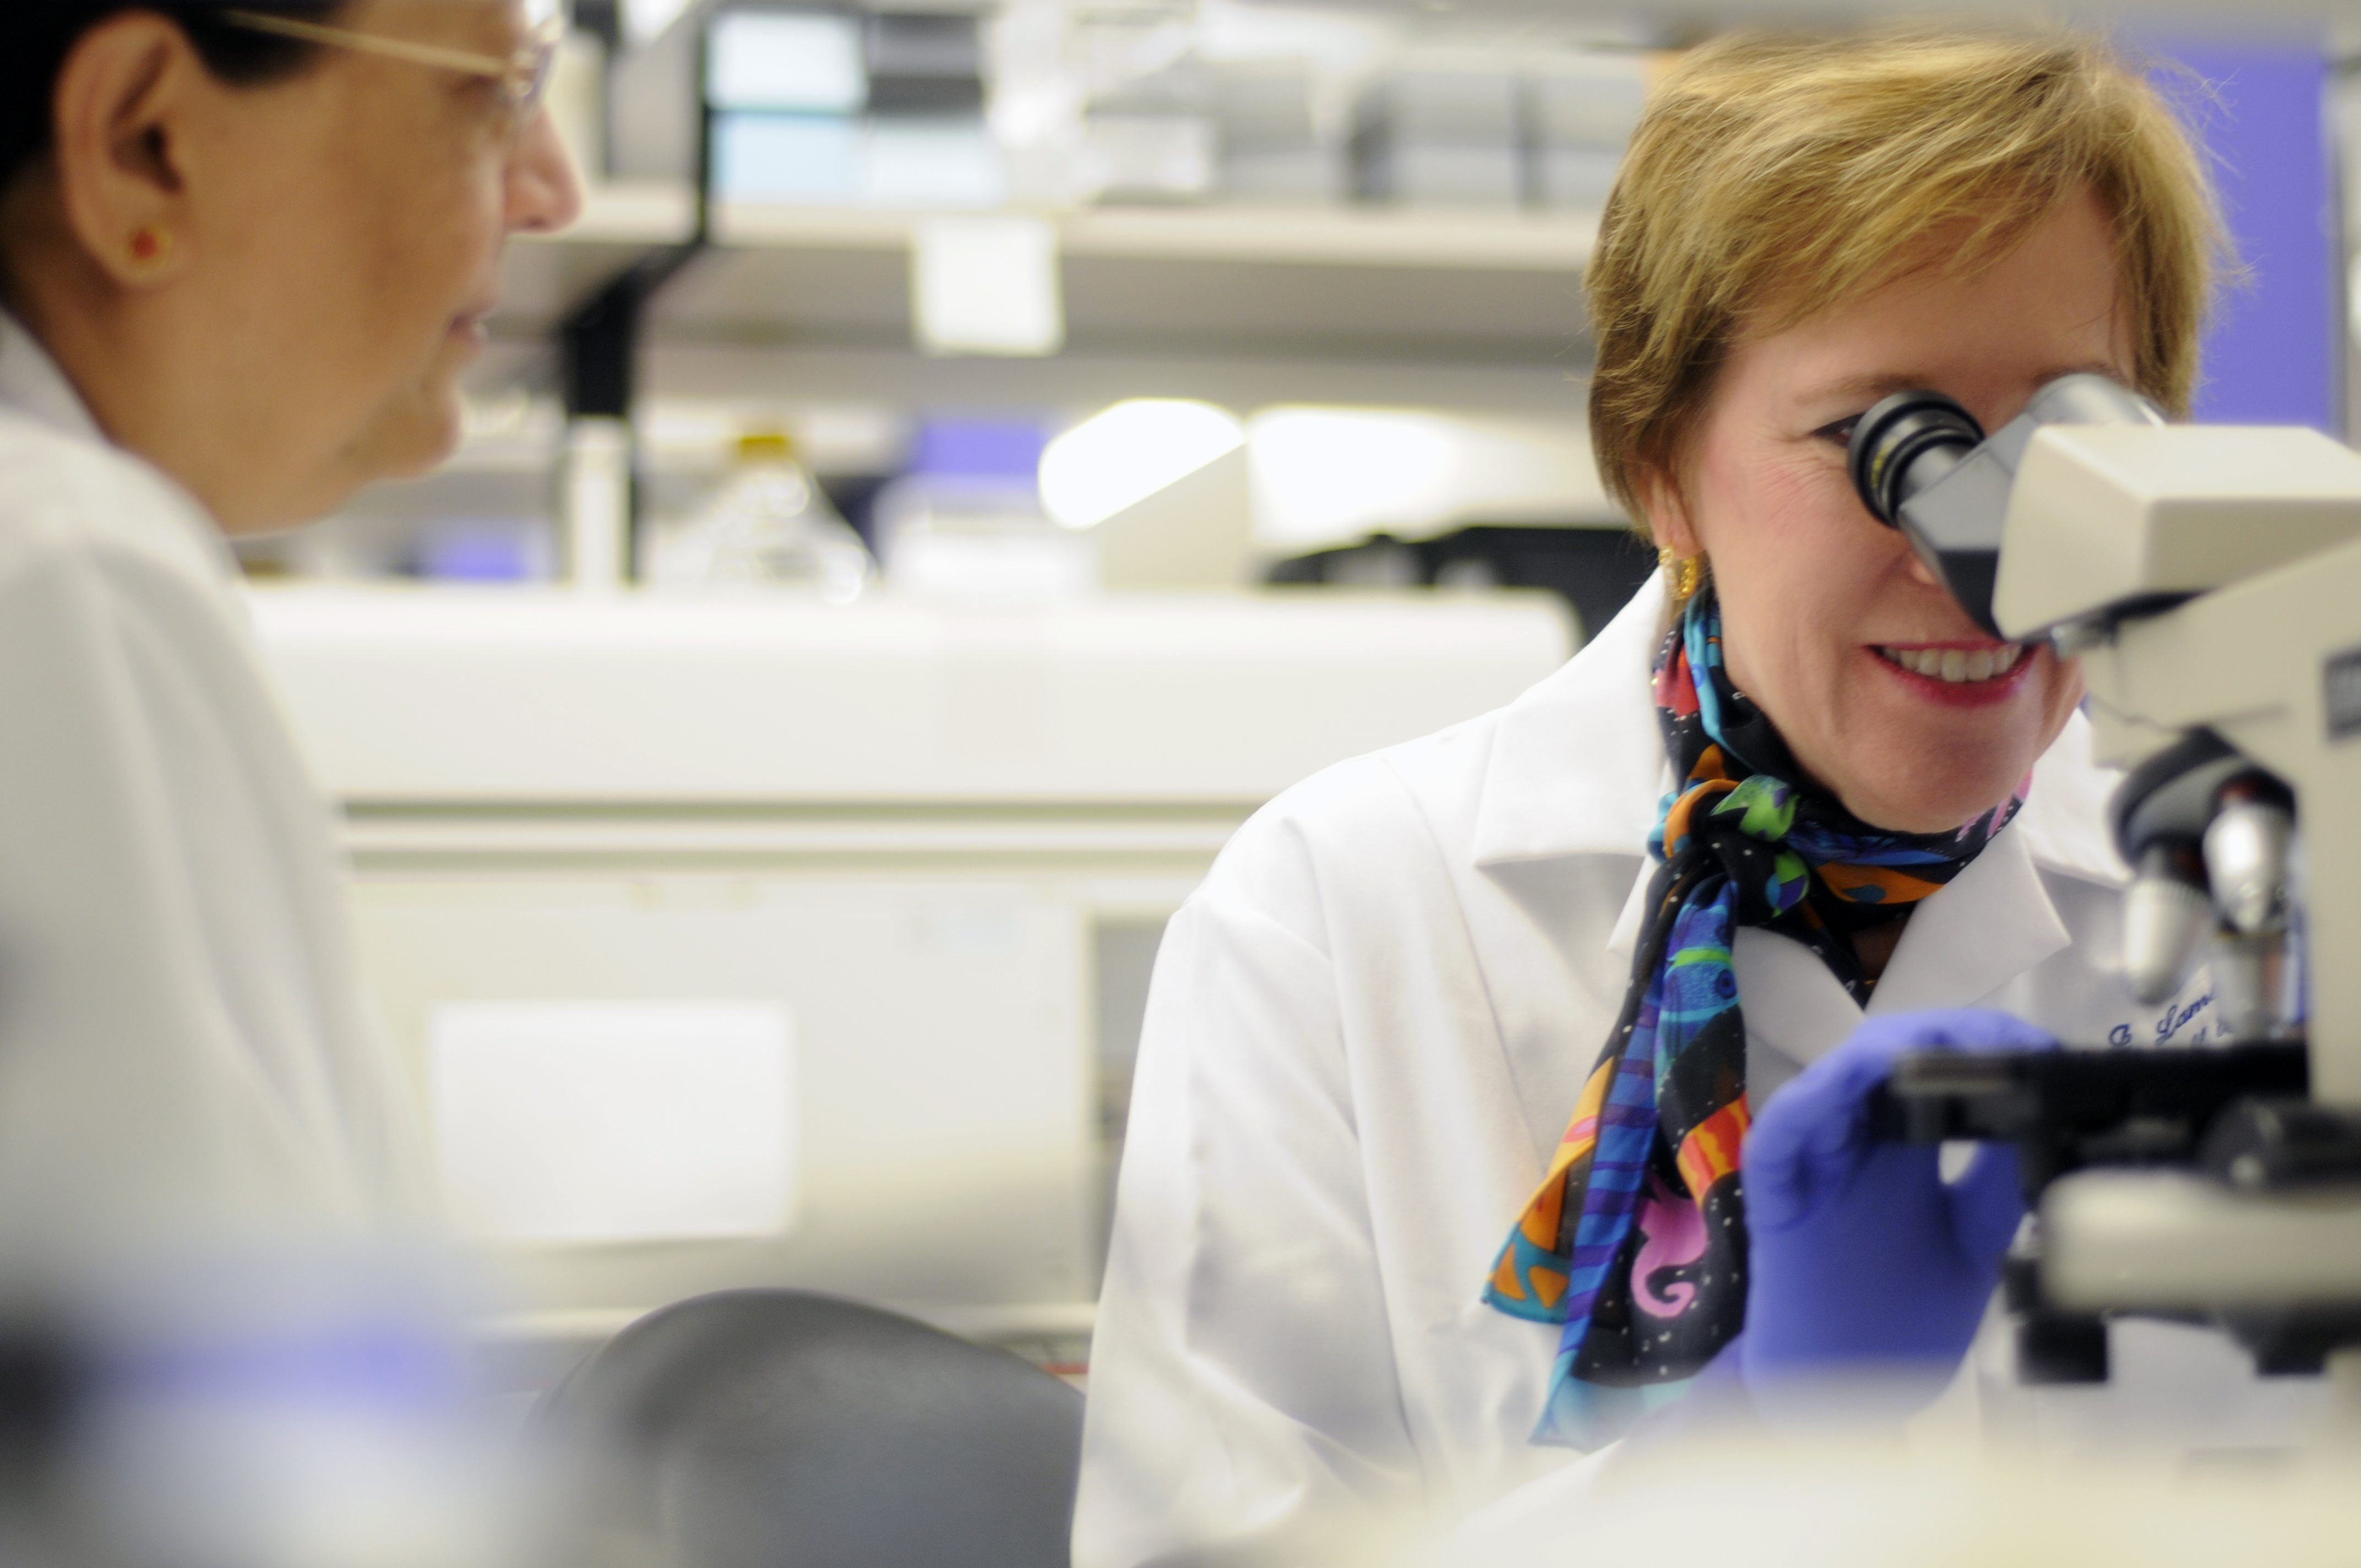 Dr. Dolores Lamb leads team that finds certain male reproductive birth defects resulted from a change in the number of copies of a gene, VAMP7.